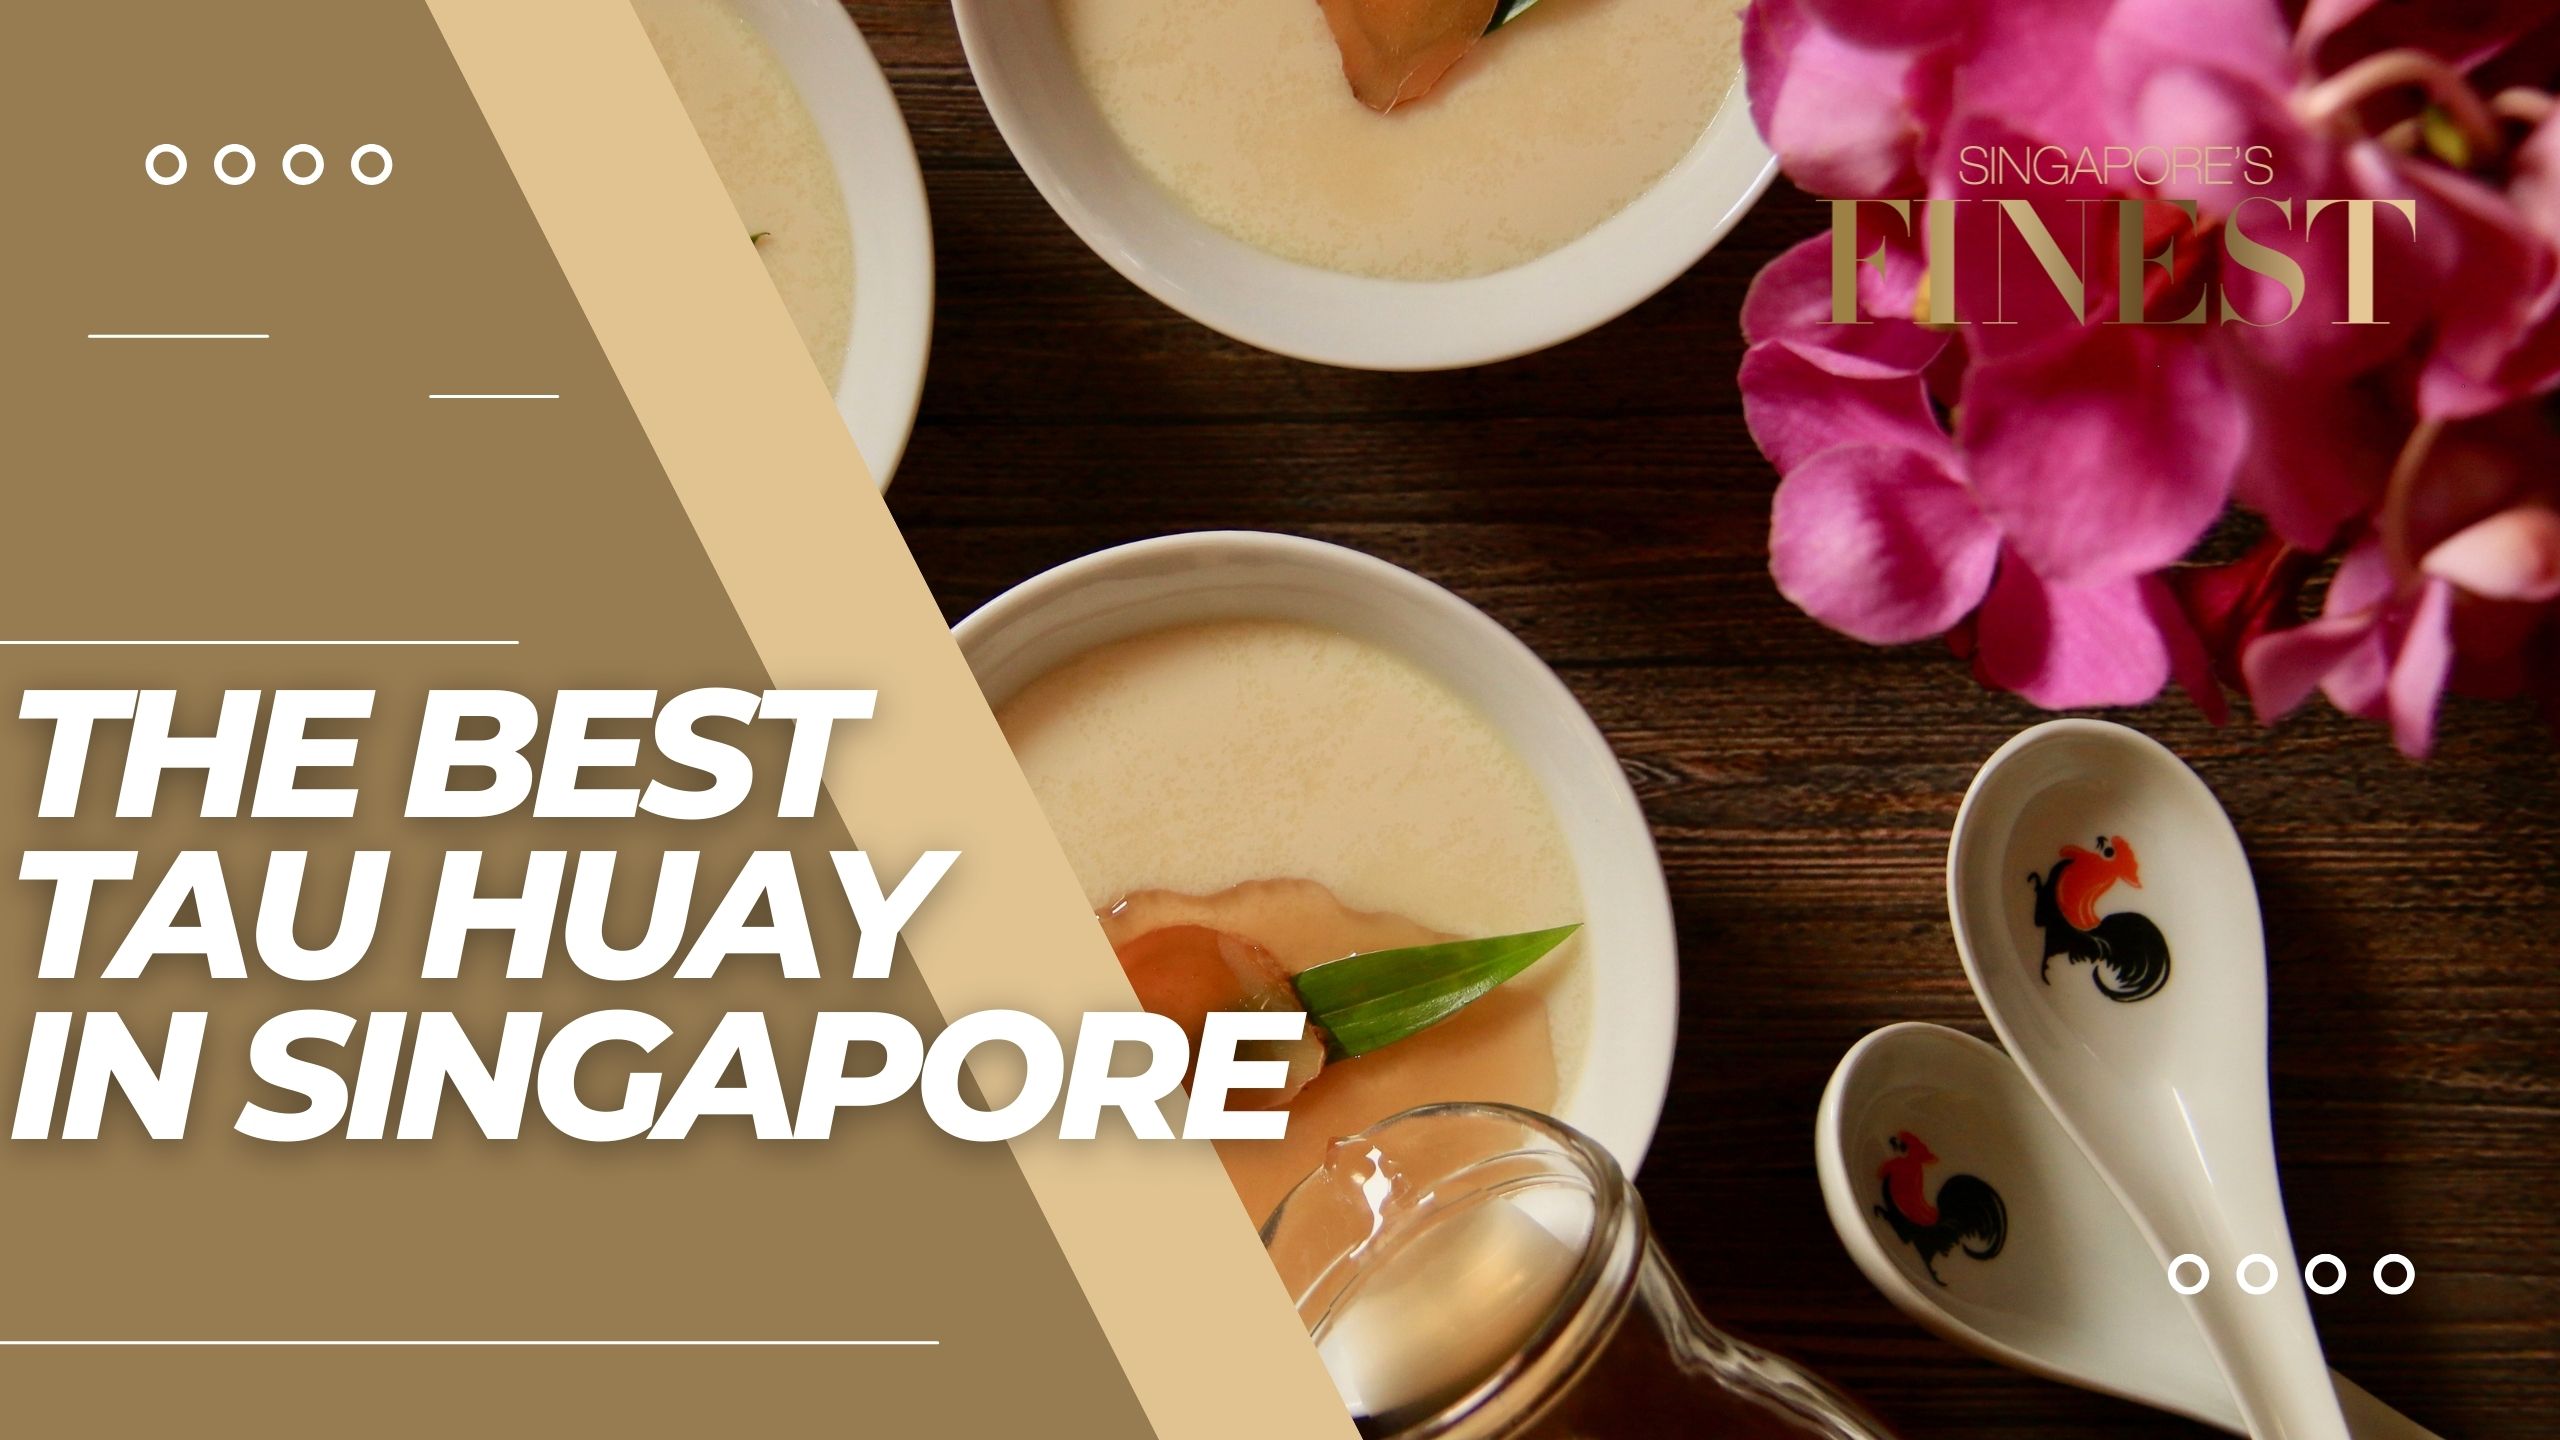 The Finest Tau Huay in Singapore